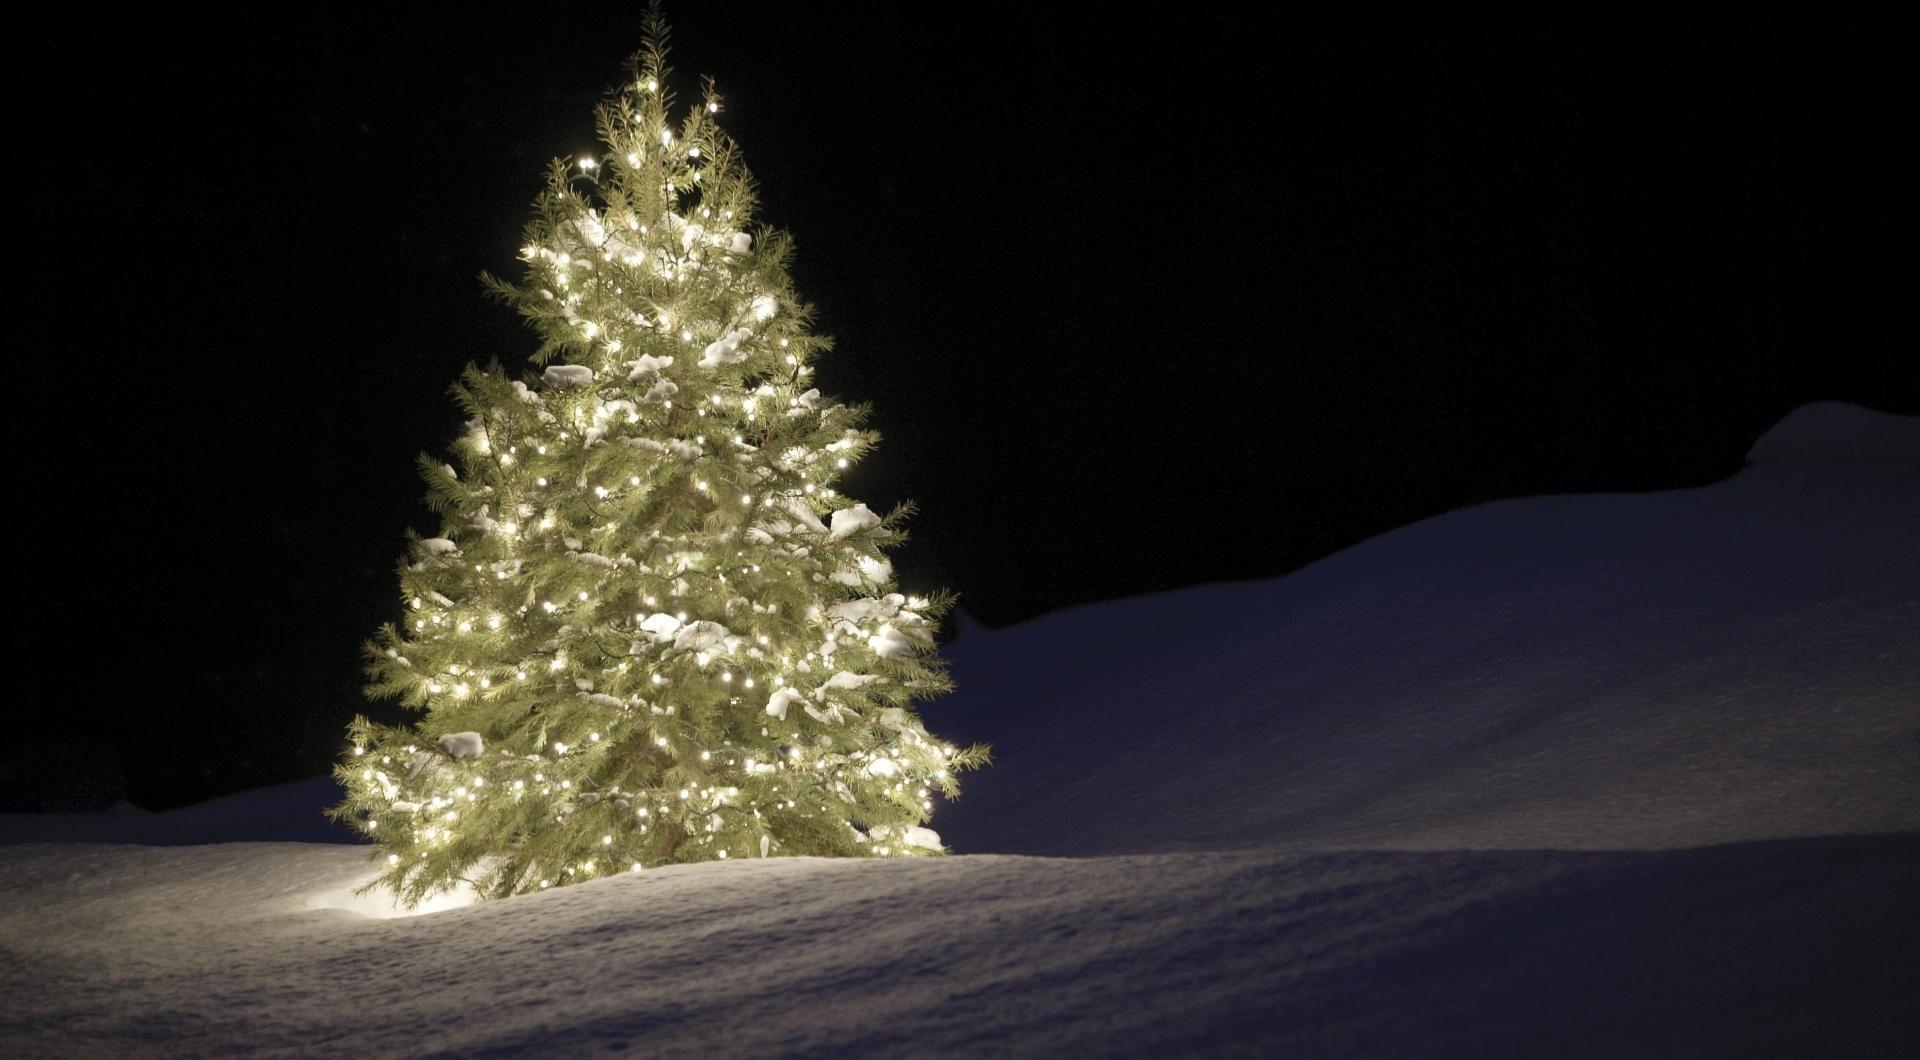 Lighted Christmas Tree In Snow - HD Wallpaper 